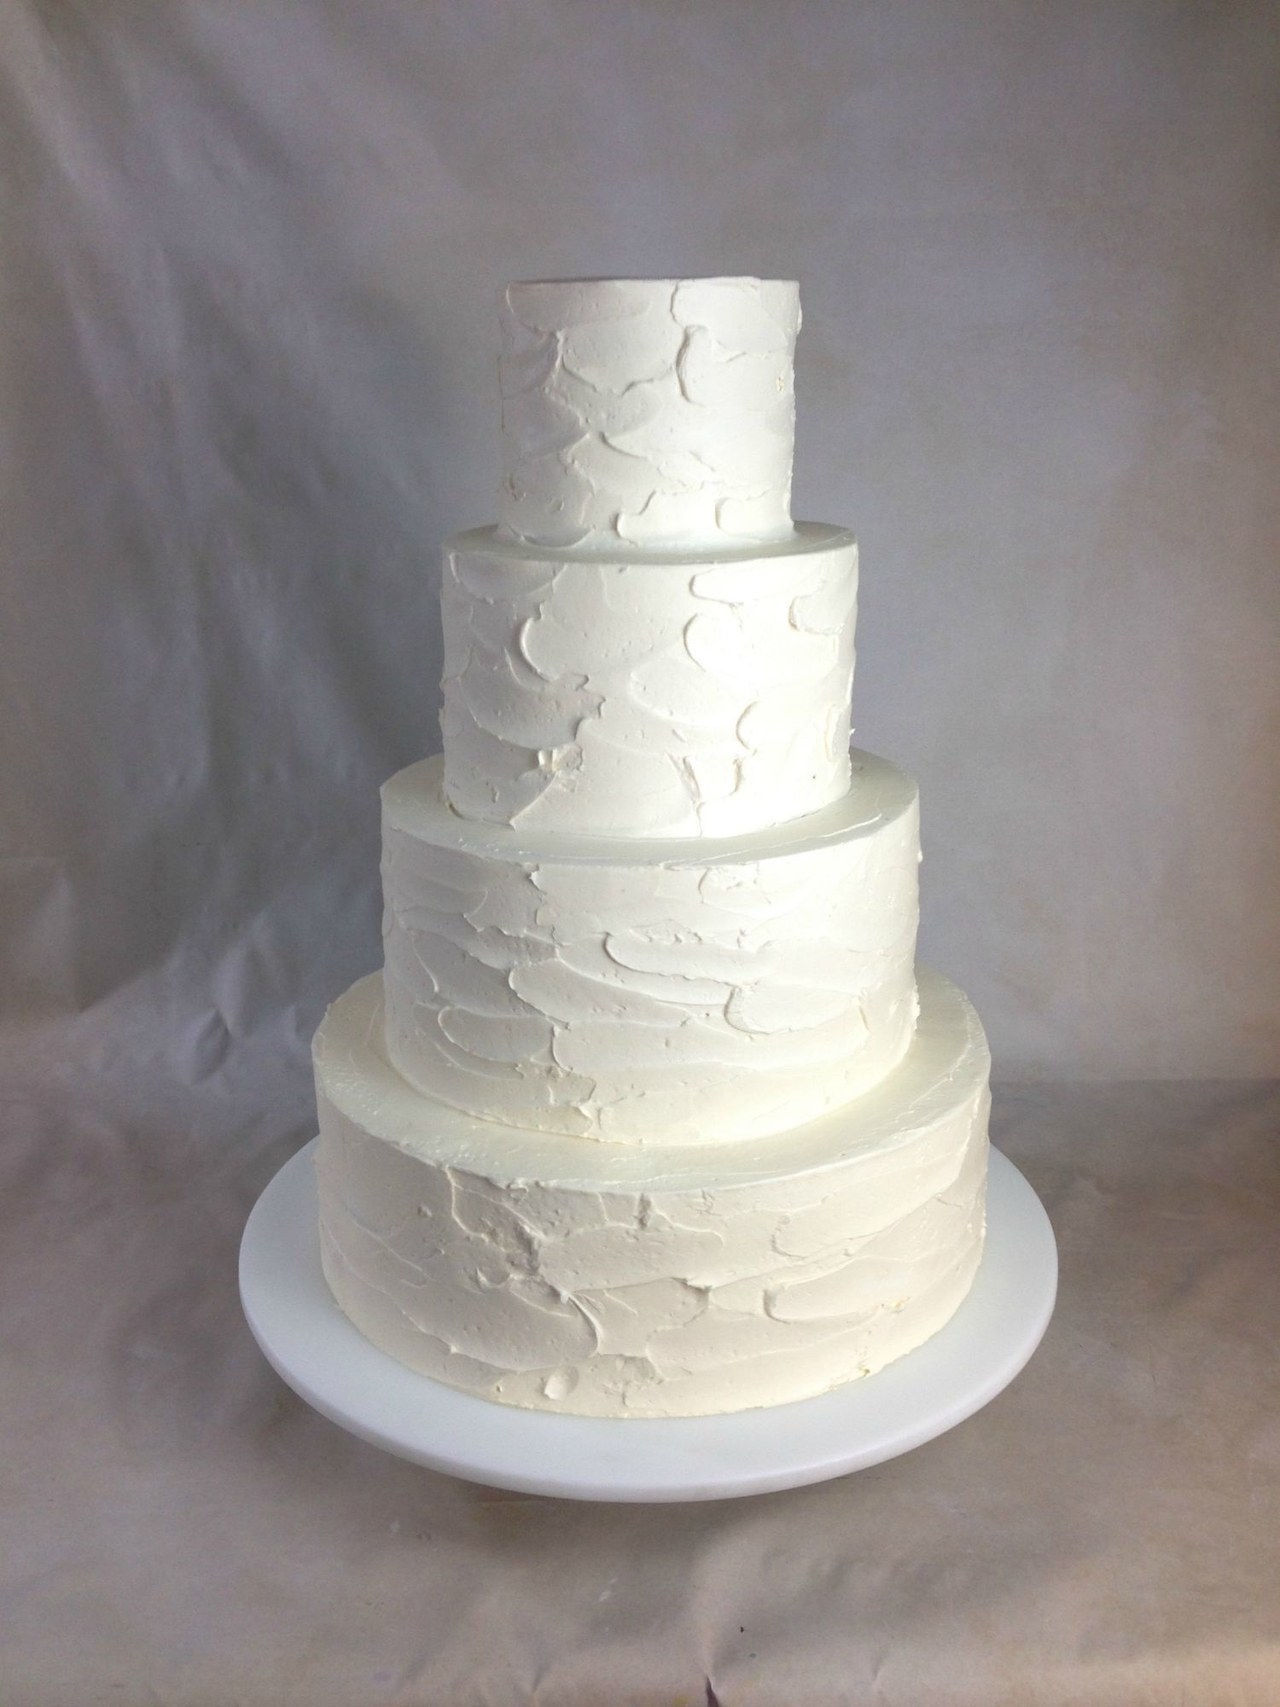 03 2016 wedding cake trends white with texture cescaphe